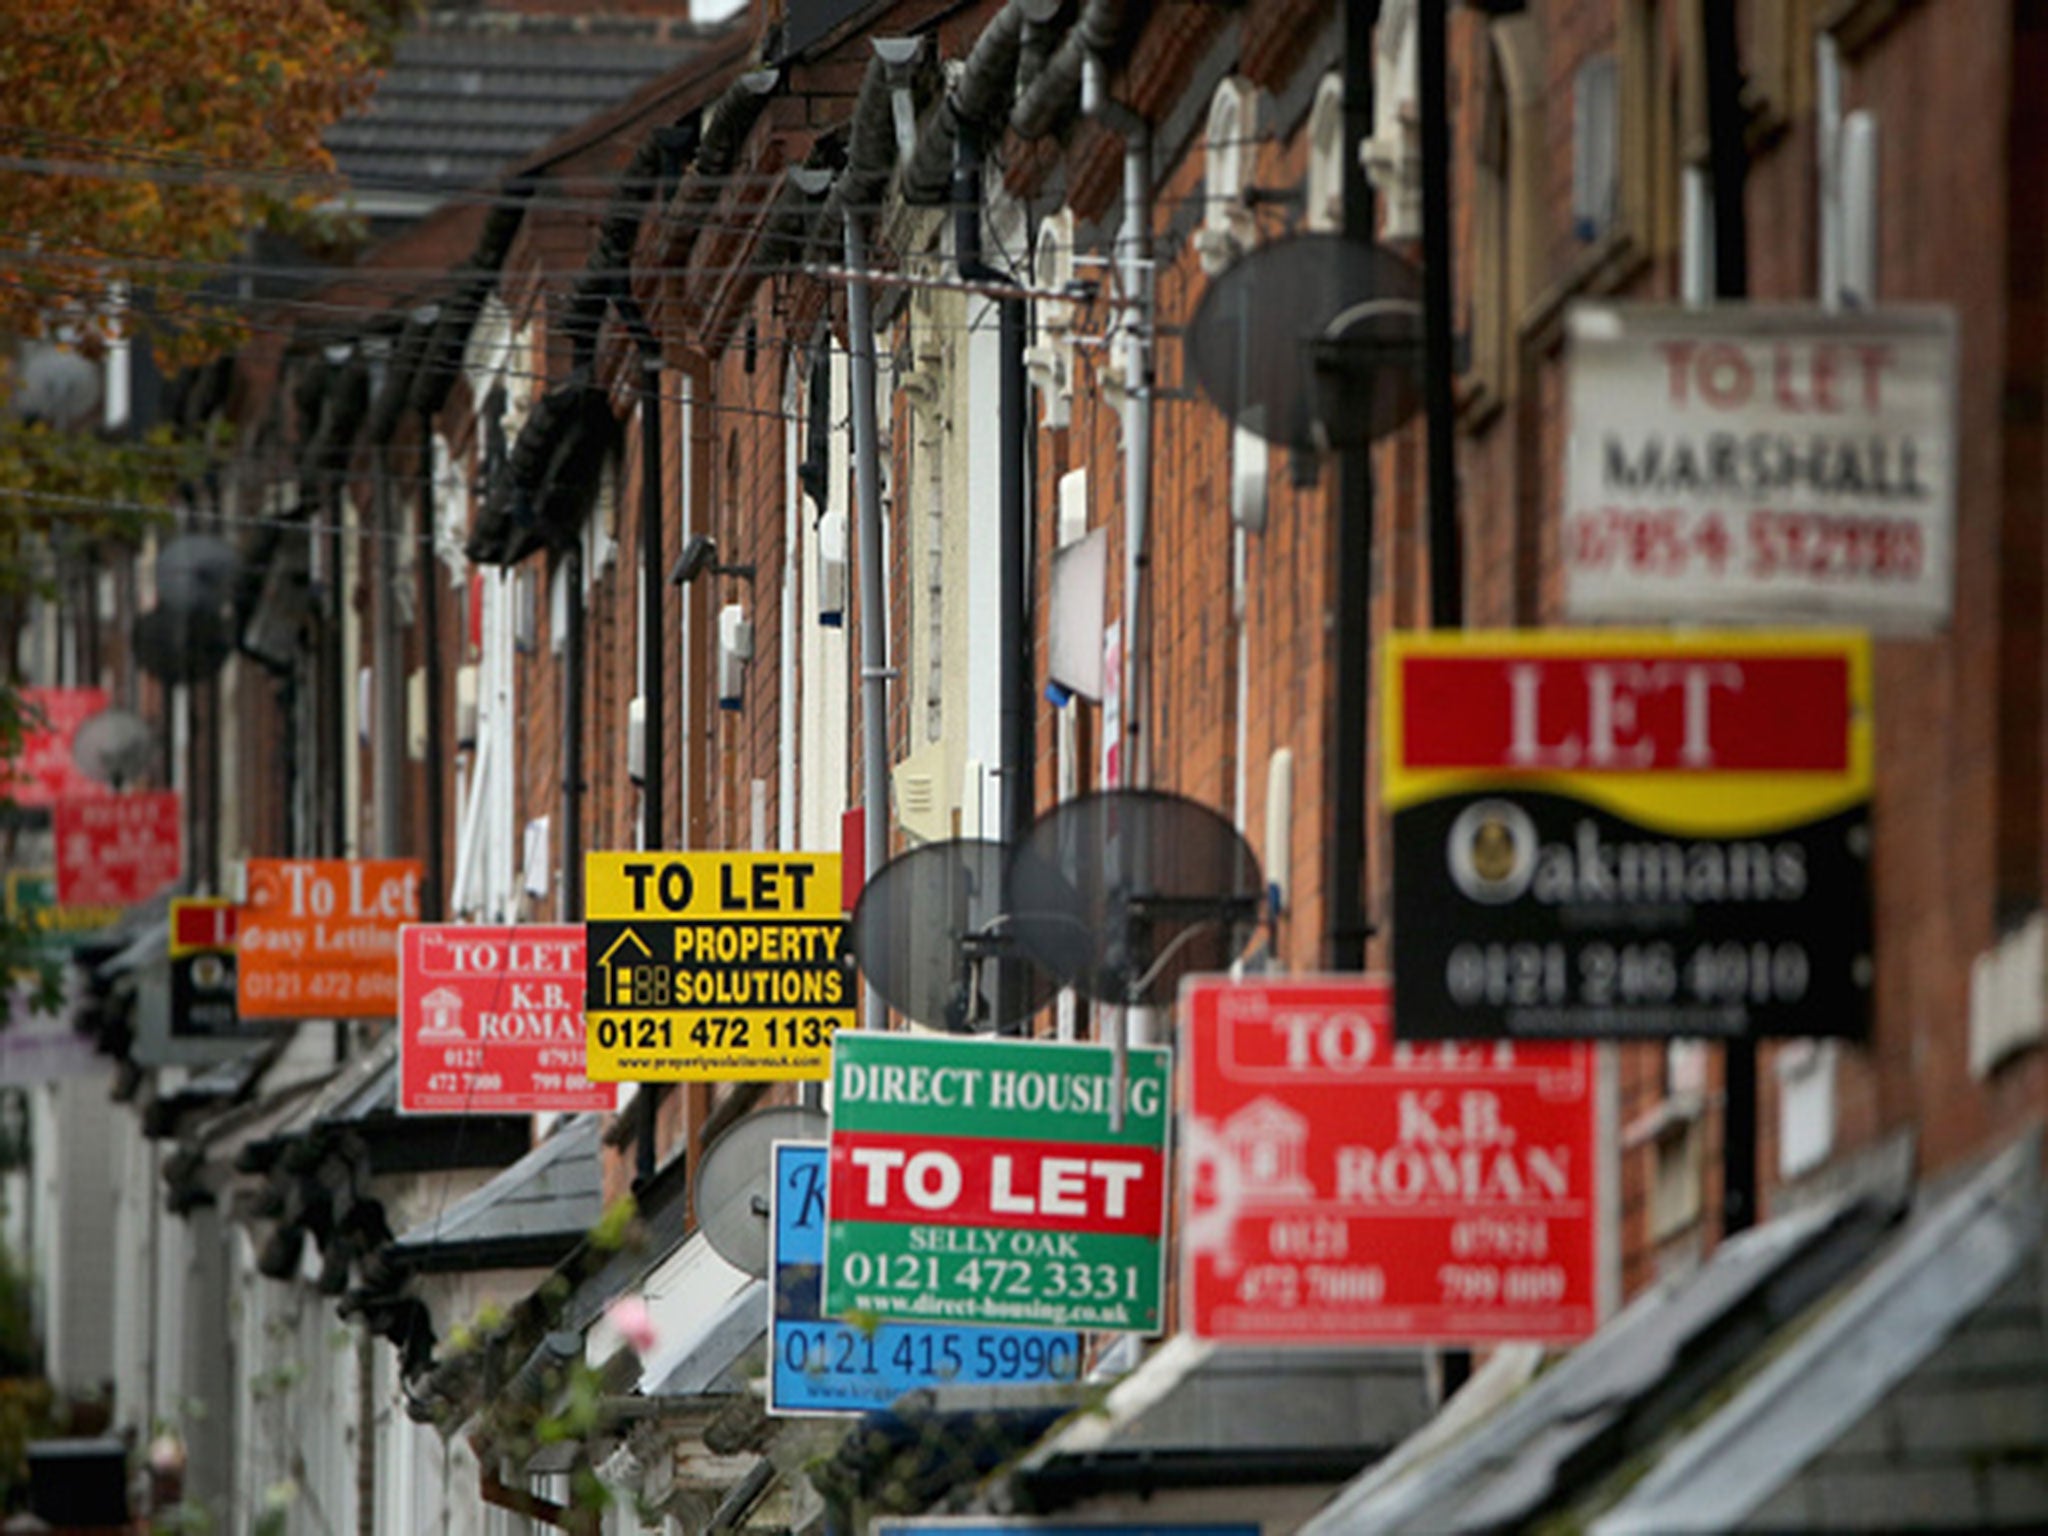 The lettings market is booming